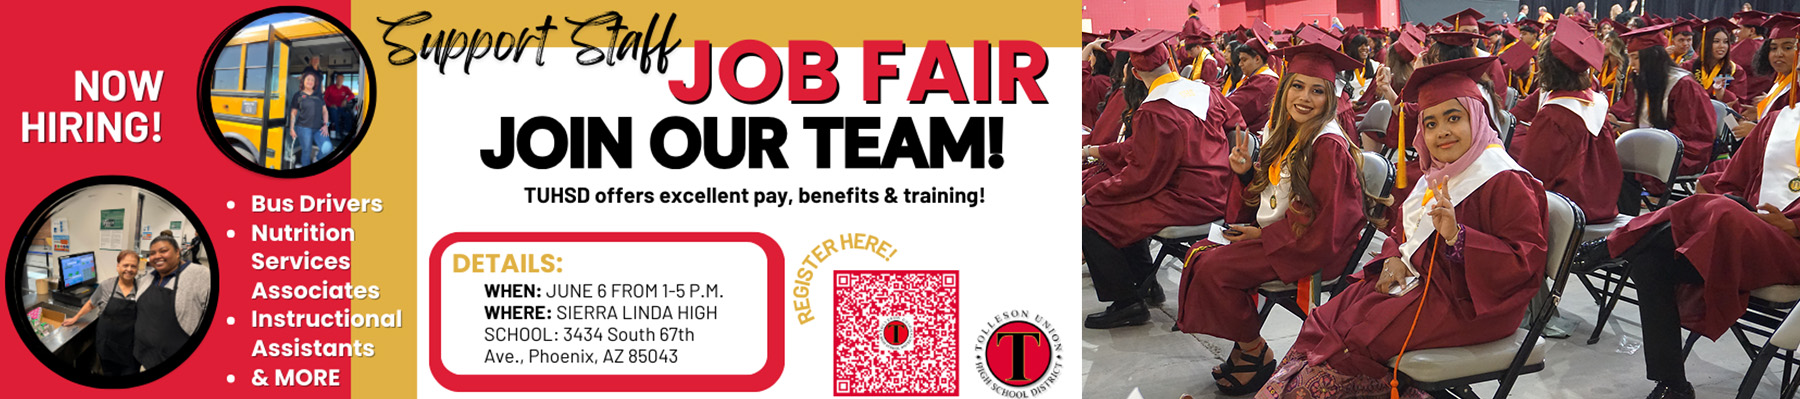 TUHSD Job Fair- we offer excellent pay, benefits, & training! Hiring bus drivers, nutrition services associates, instructional assistants & more. June 6 from 1-5 pm at Sierra Linda HS in Phoenix, AZ 85043 | Top 10 scholarship recepients